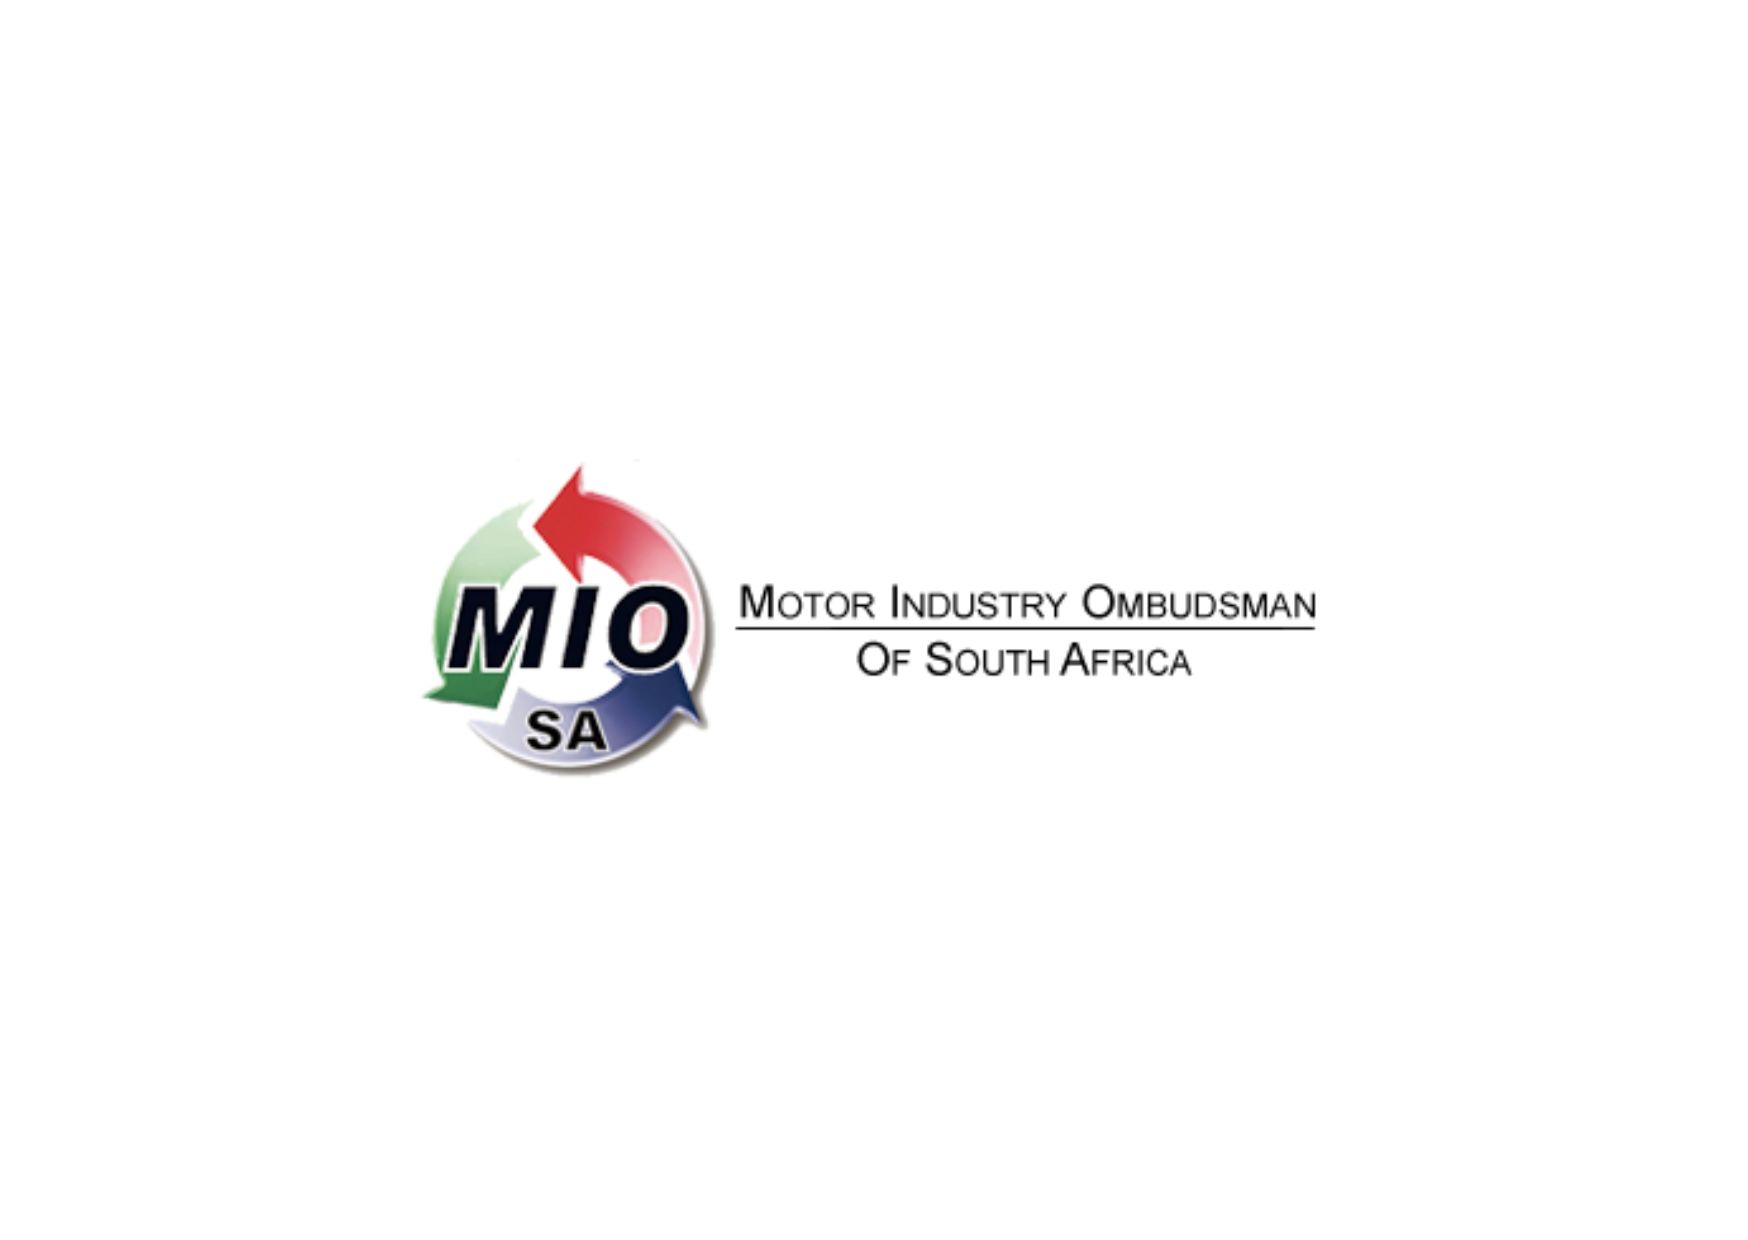 Motor Industry Ombud scheme of South Africa (MIOSA) Logo